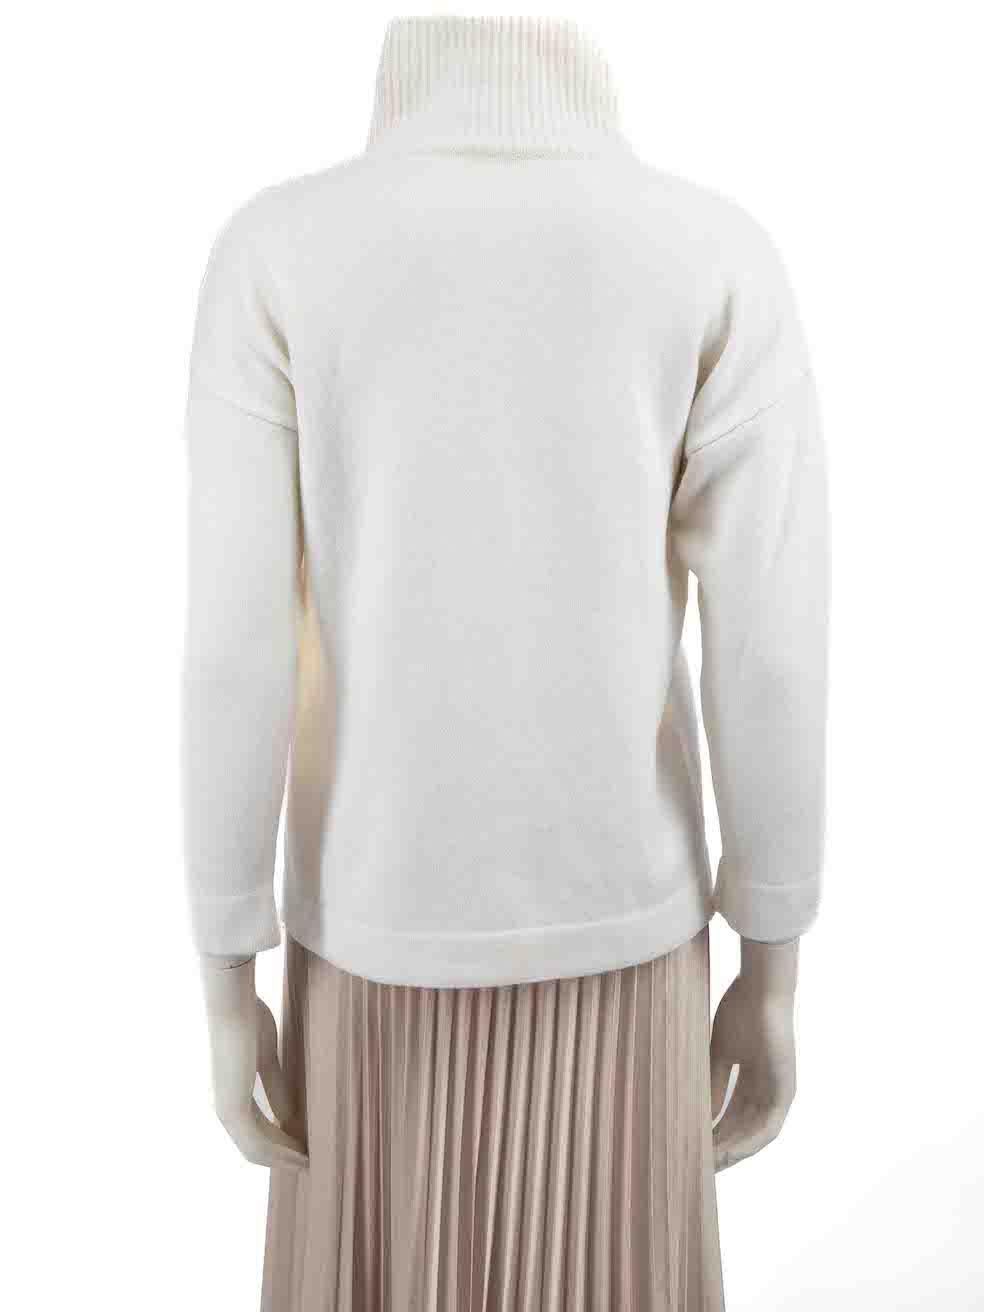 Max Mara White Wool Knit Turtleneck Jumper Size S In Good Condition For Sale In London, GB